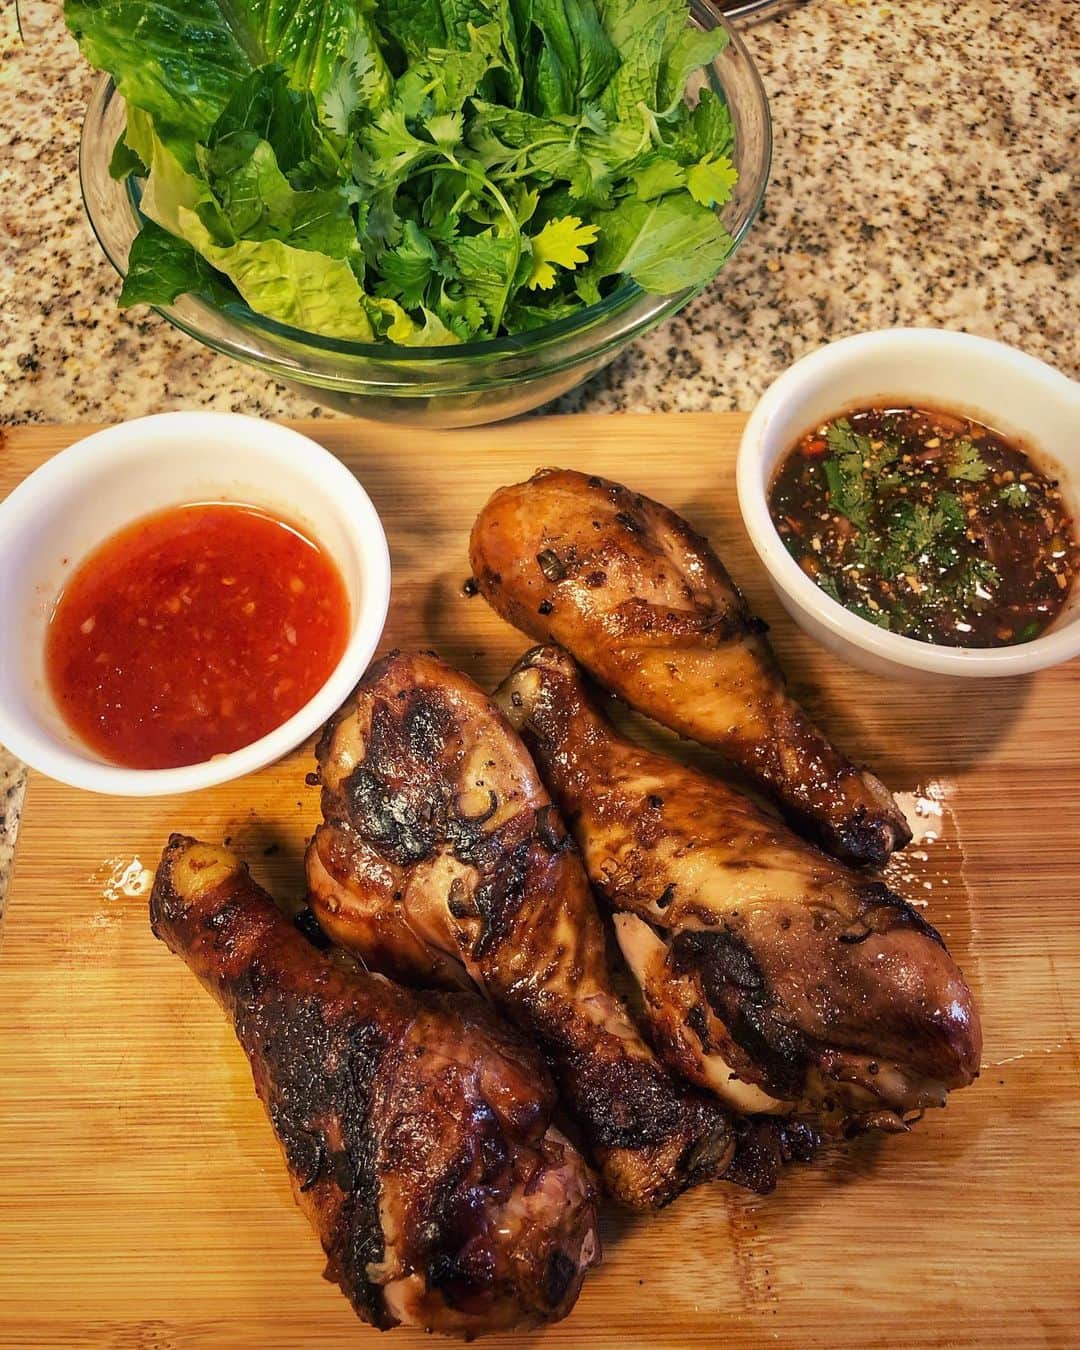 Jada Lalita Patipaksiriのインスタグラム：「We are sauce people!👩‍❤️‍👨 Gai yang🍗(Thai bbq chicken) with nam jim jeaw🌶 & a sweet and sour dipping sauce🥣 love them both but the spicier option always wins for me😅🤤  #thaichicken #bbqchicken #spicy #veggies #chilis #garlic #lemongrass #dinner #sauce #tasty #yum  #foodpics #foodie #yummy #thaispice #food #cooking #spicyfood #asian #asianfood #thaifood #authenticthai #recipe」